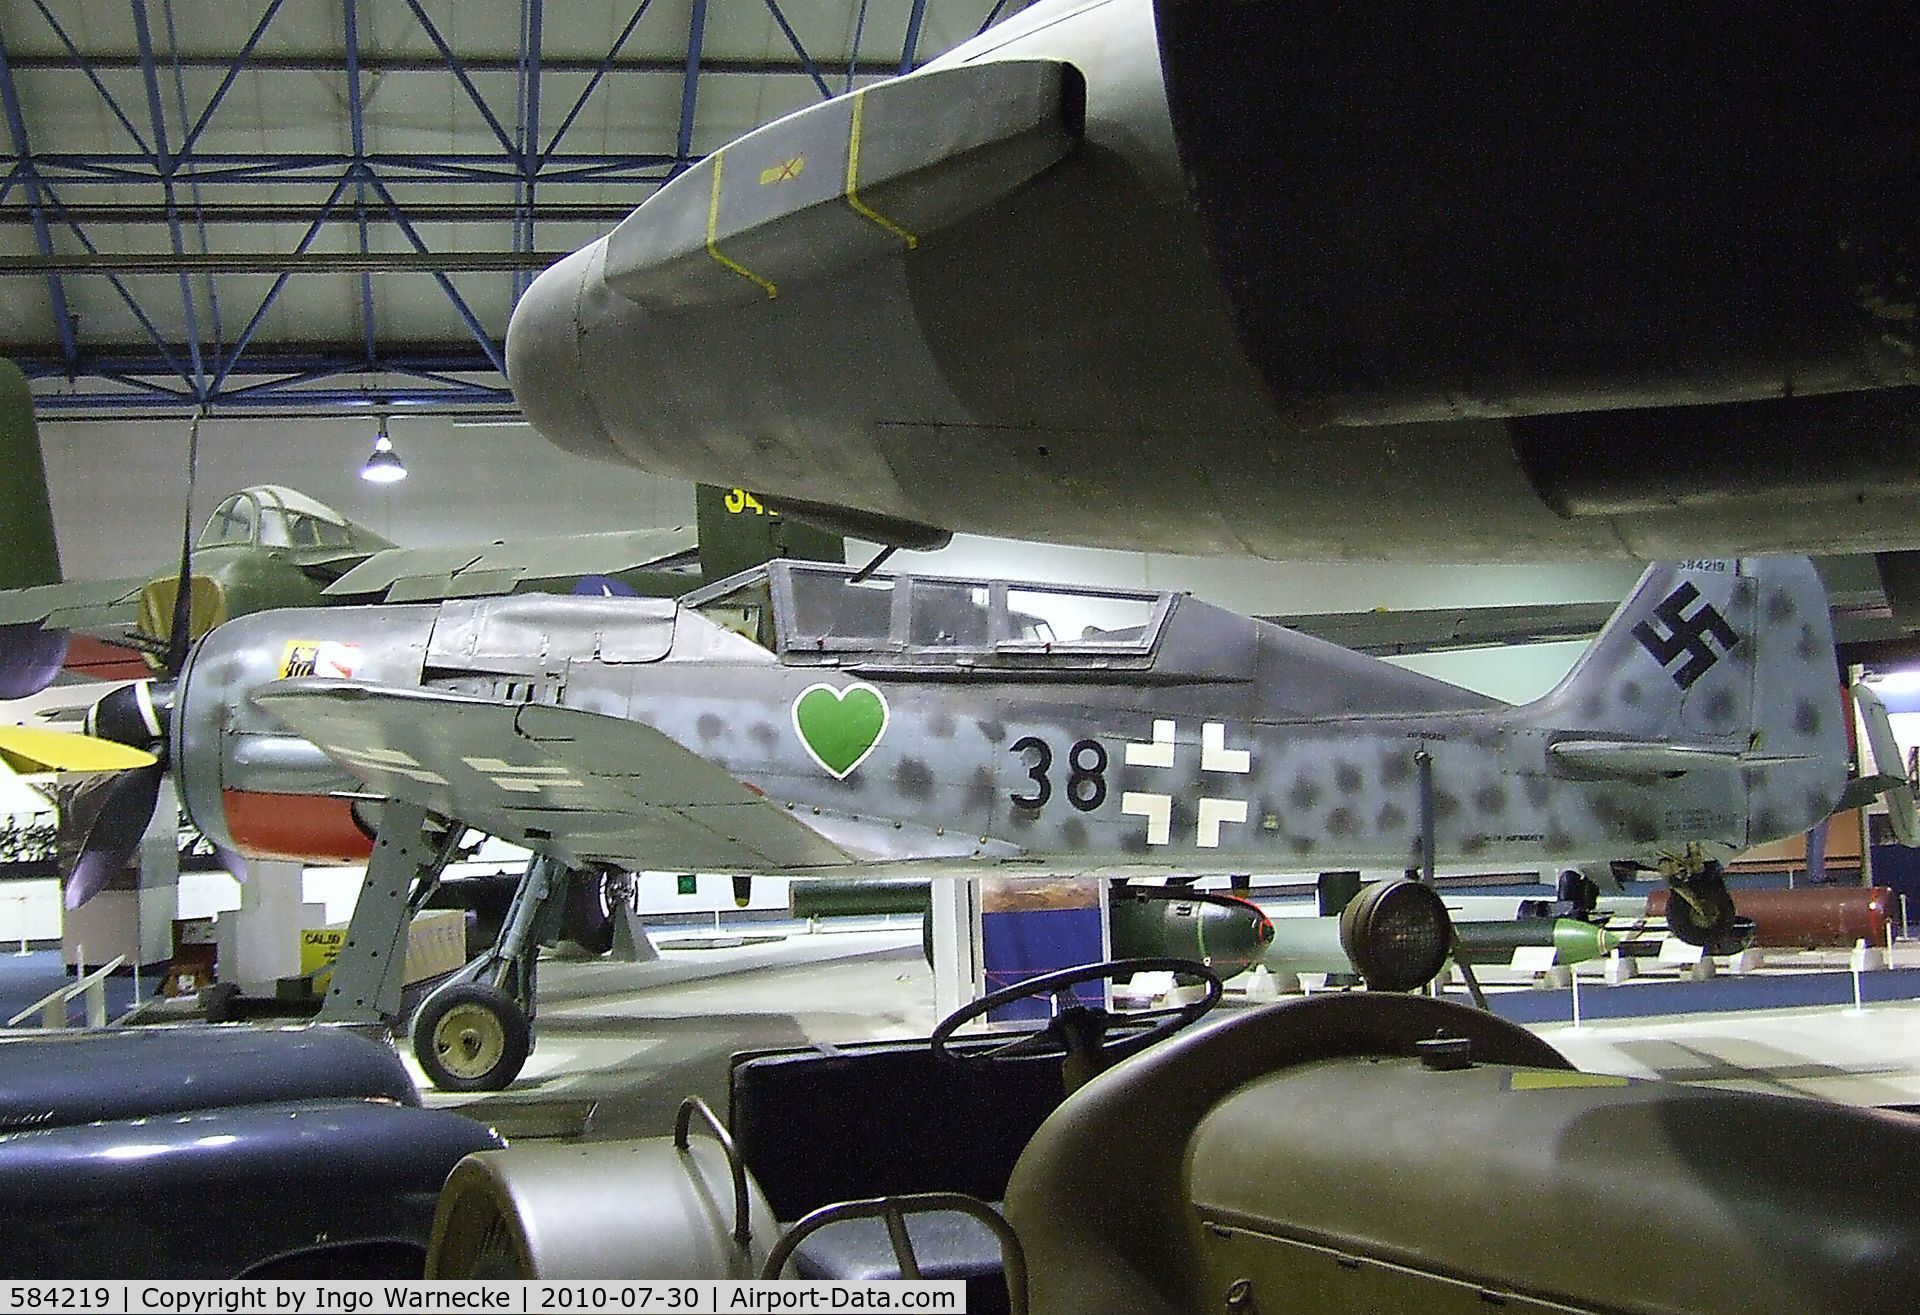 584219, Focke-Wulf Fw-190F-8/U1 C/N 584219, Focke-Wulf Fw 190A-8/U-1 two-seater conversion at the RAF Museum, Hendon